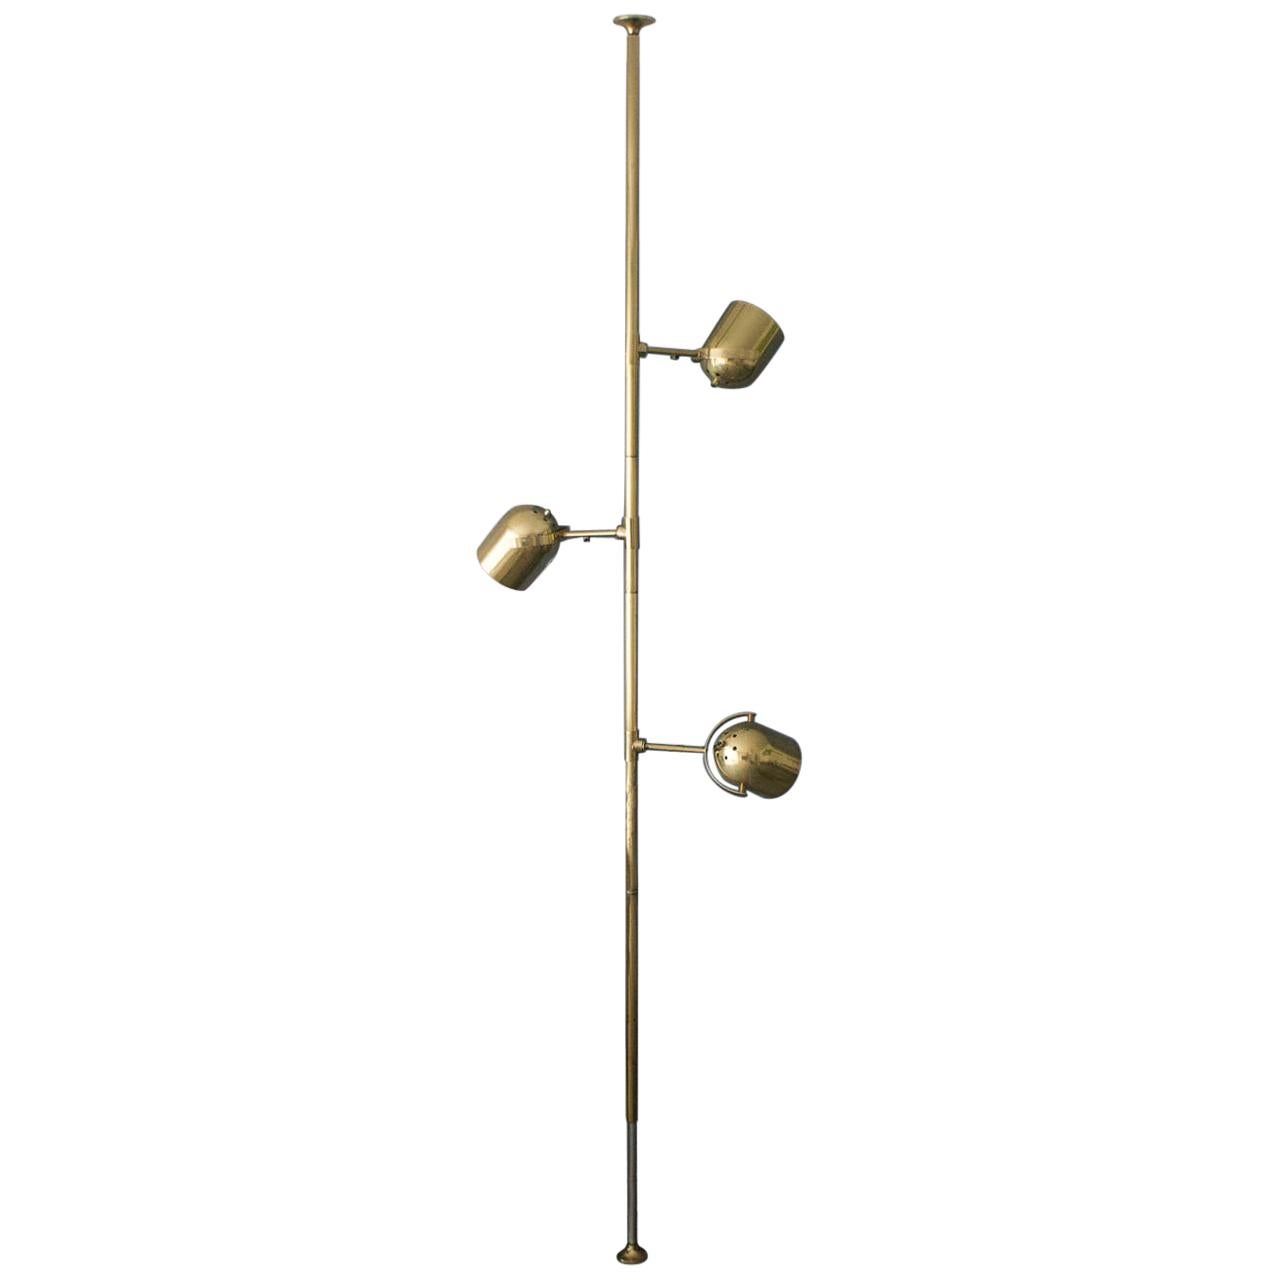 Extremly Rare Brass Tension Lamp from Florian Schulz, Model S 100